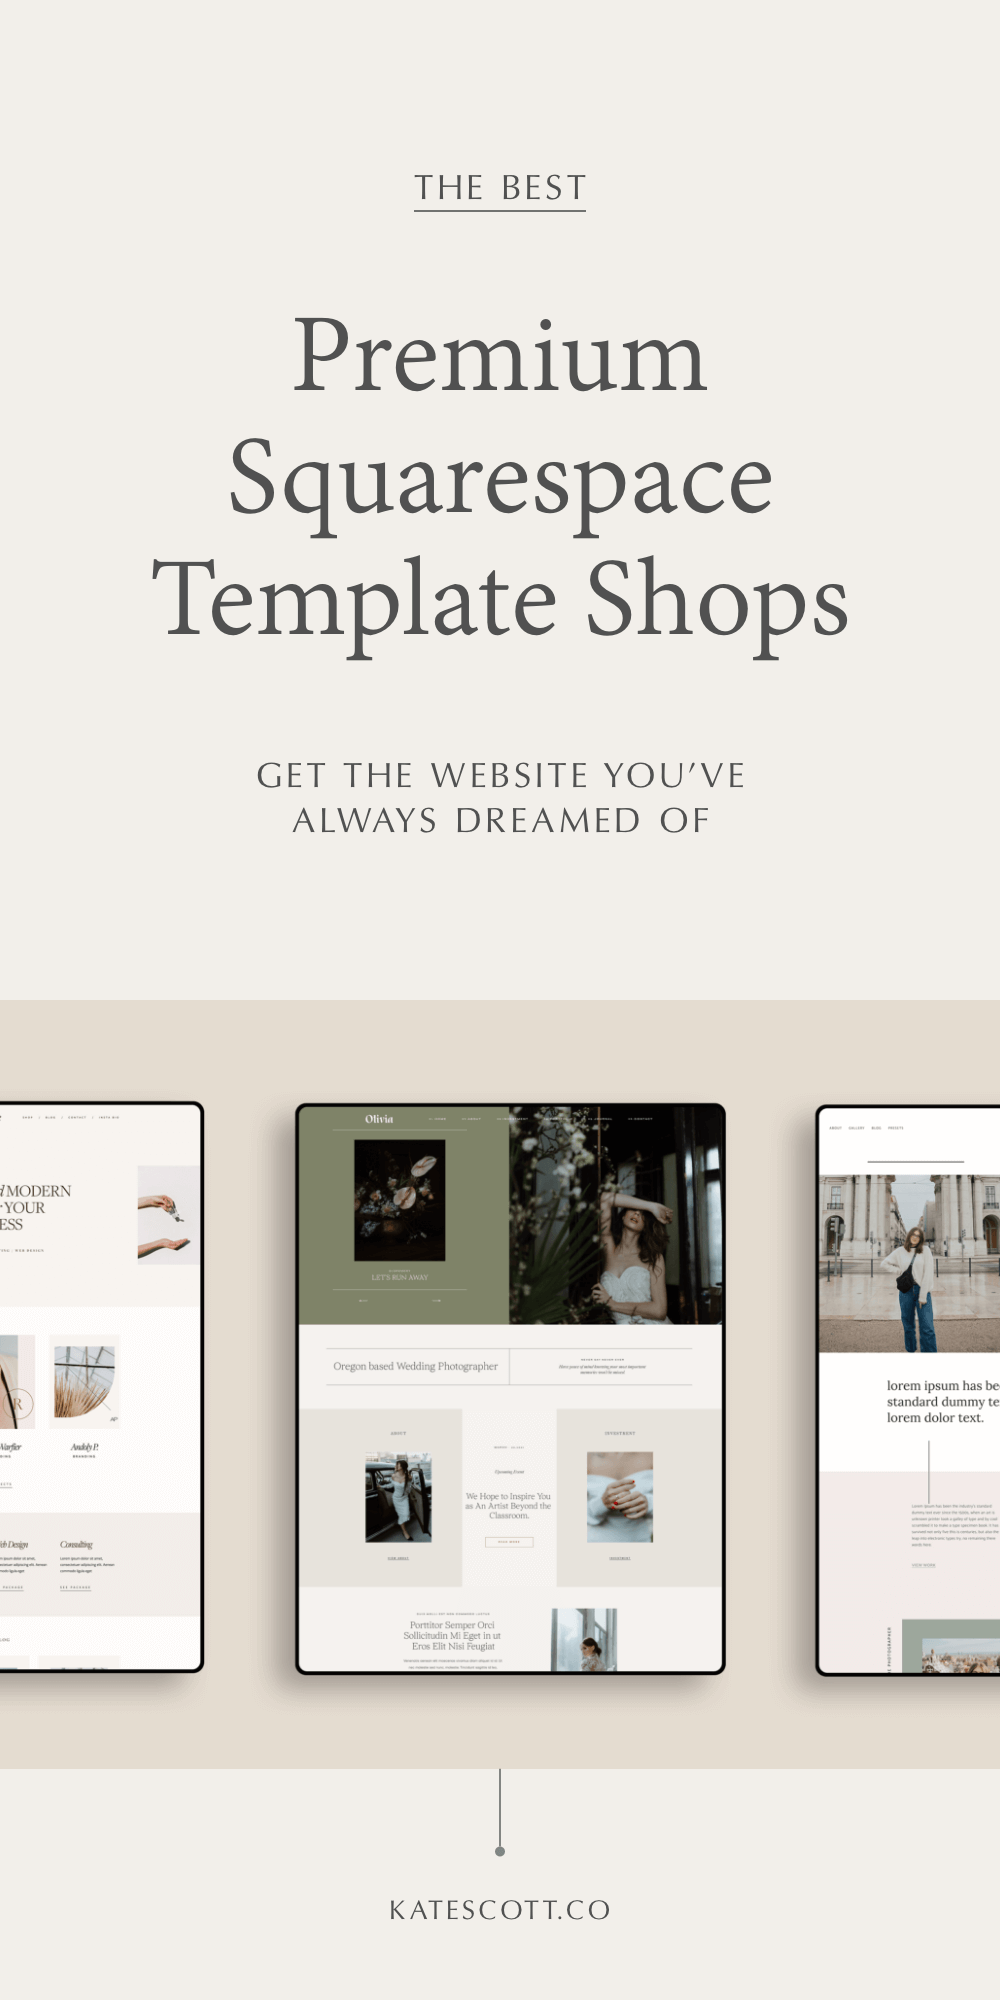 18 Premium Squarespace Template Shops You Need To Know About Kate Scott Squarespace Templates